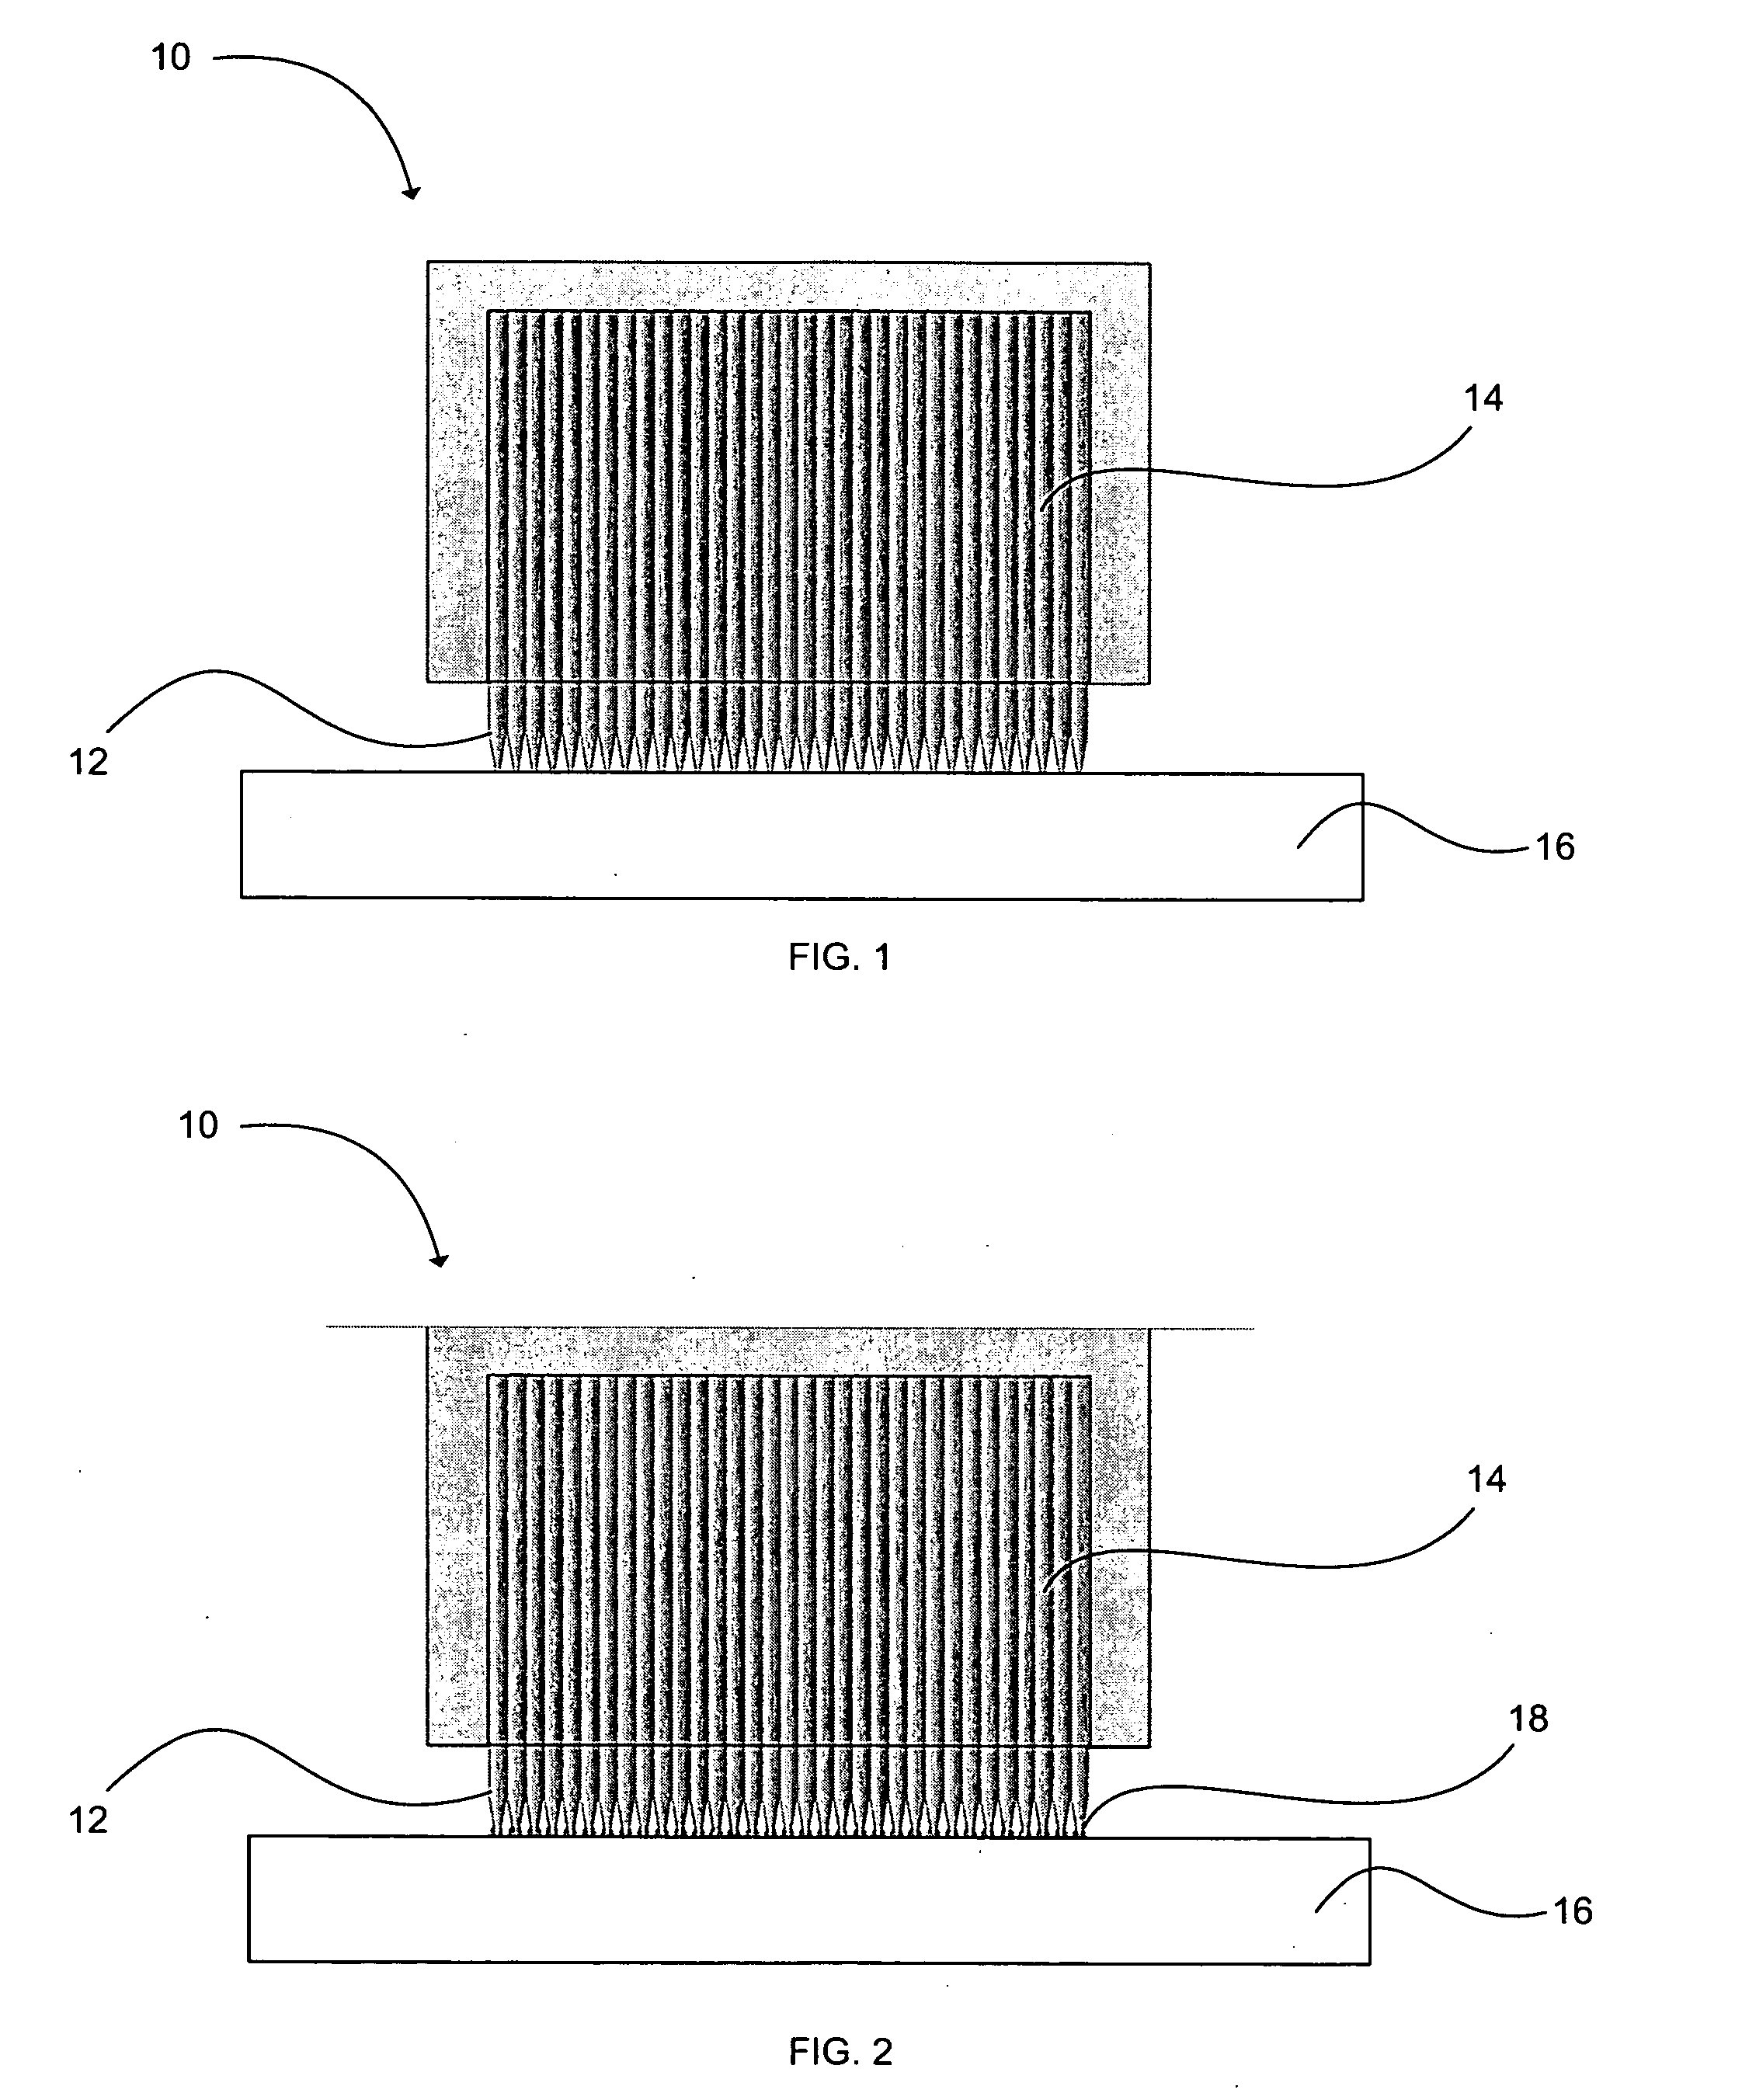 Methods for securing individual abrasive particles to a substrate in a predetermined pattern